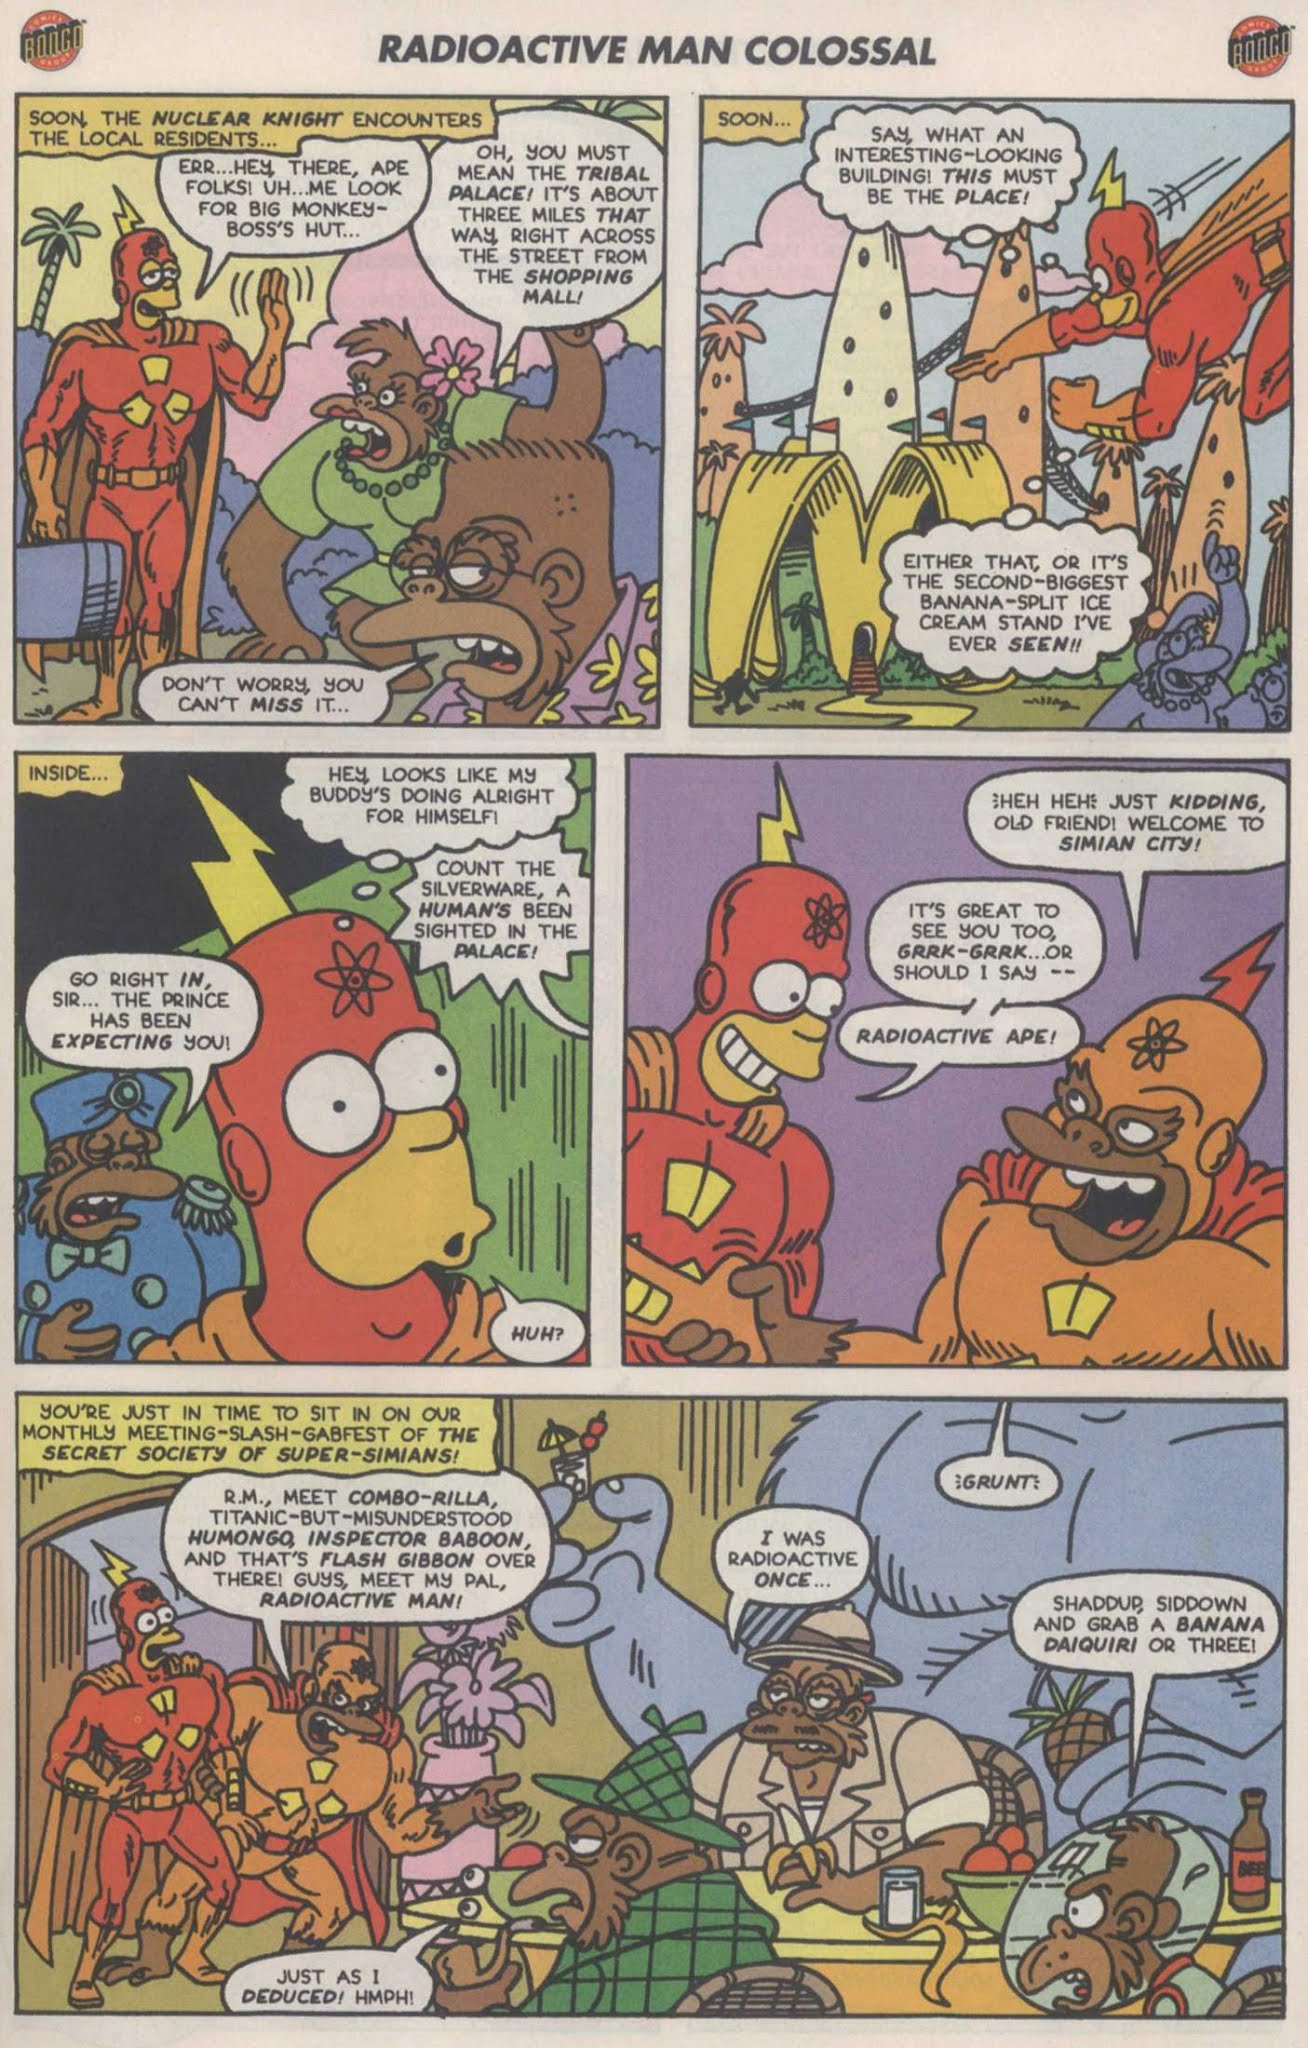 Read online Radioactive Man 80 pg. Colossal comic -  Issue # Full - 33